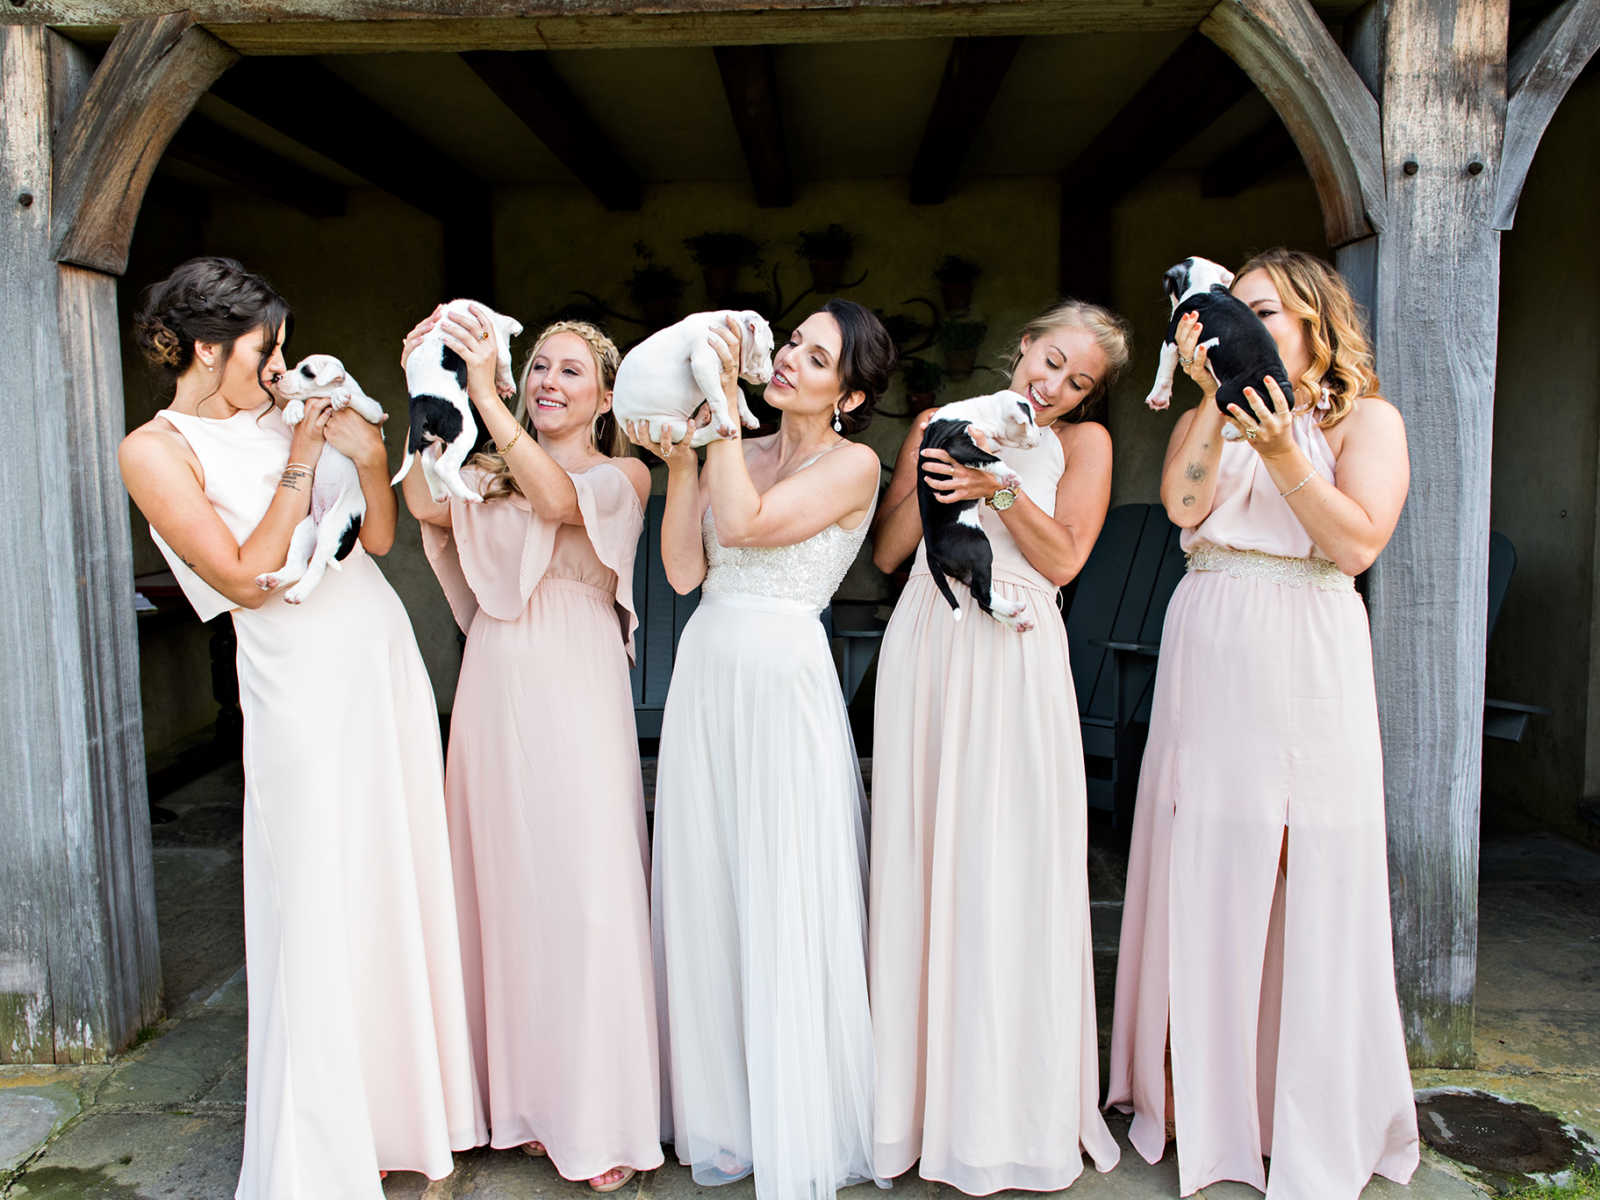 Bride and bridesmaids hold up rescue puppies to look them in the eye